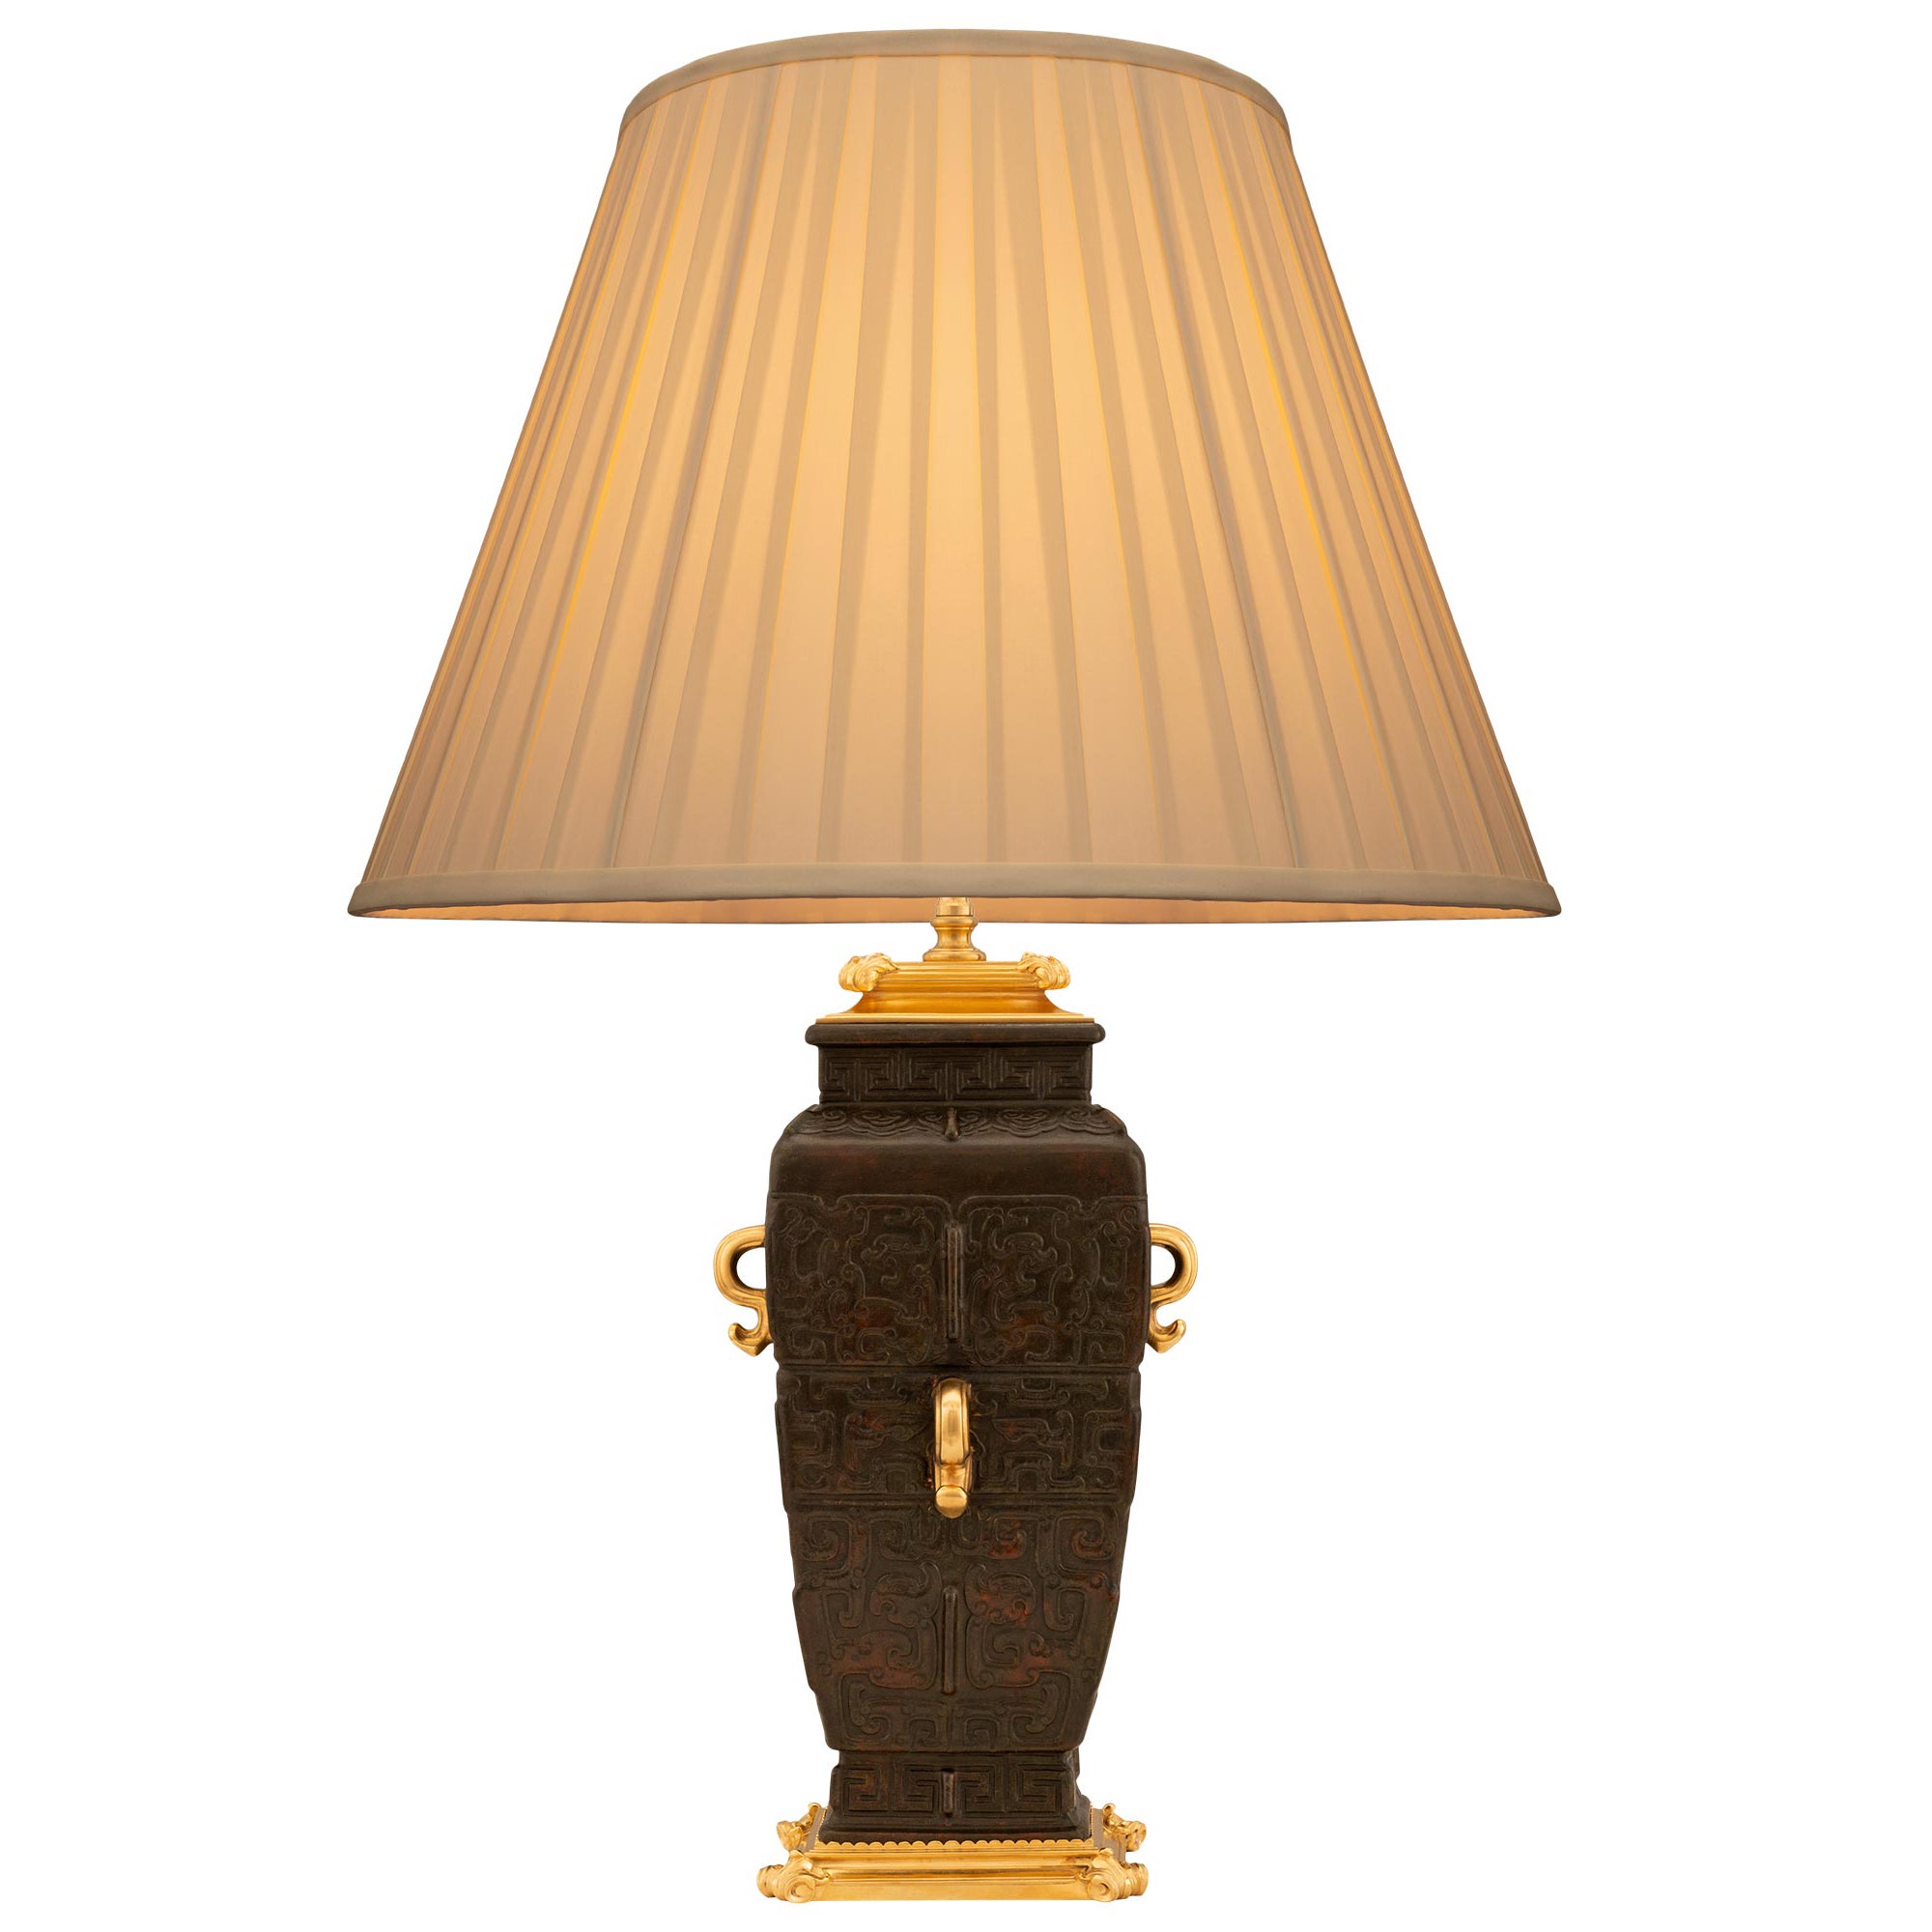 American 19th Century Patinated Bronze and Ormolu Lamp by E.F. Caldwell & Co.